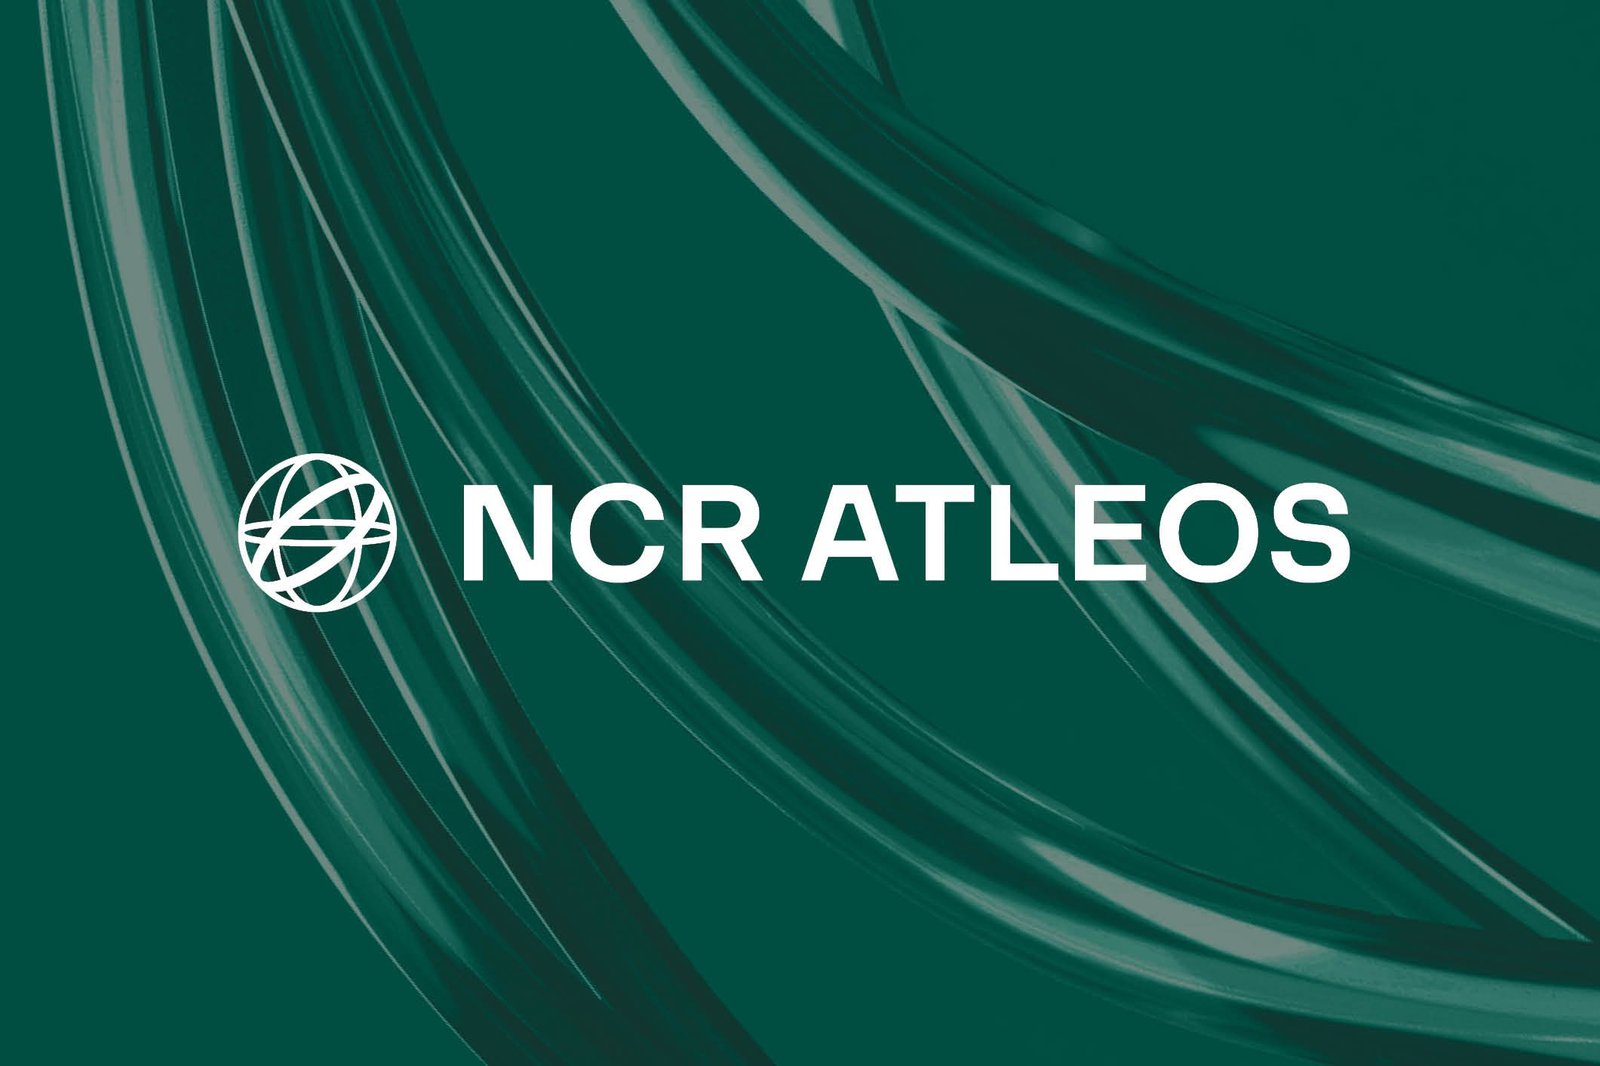 NCR Atleos Hiring For Entry-Level Automation Engineers